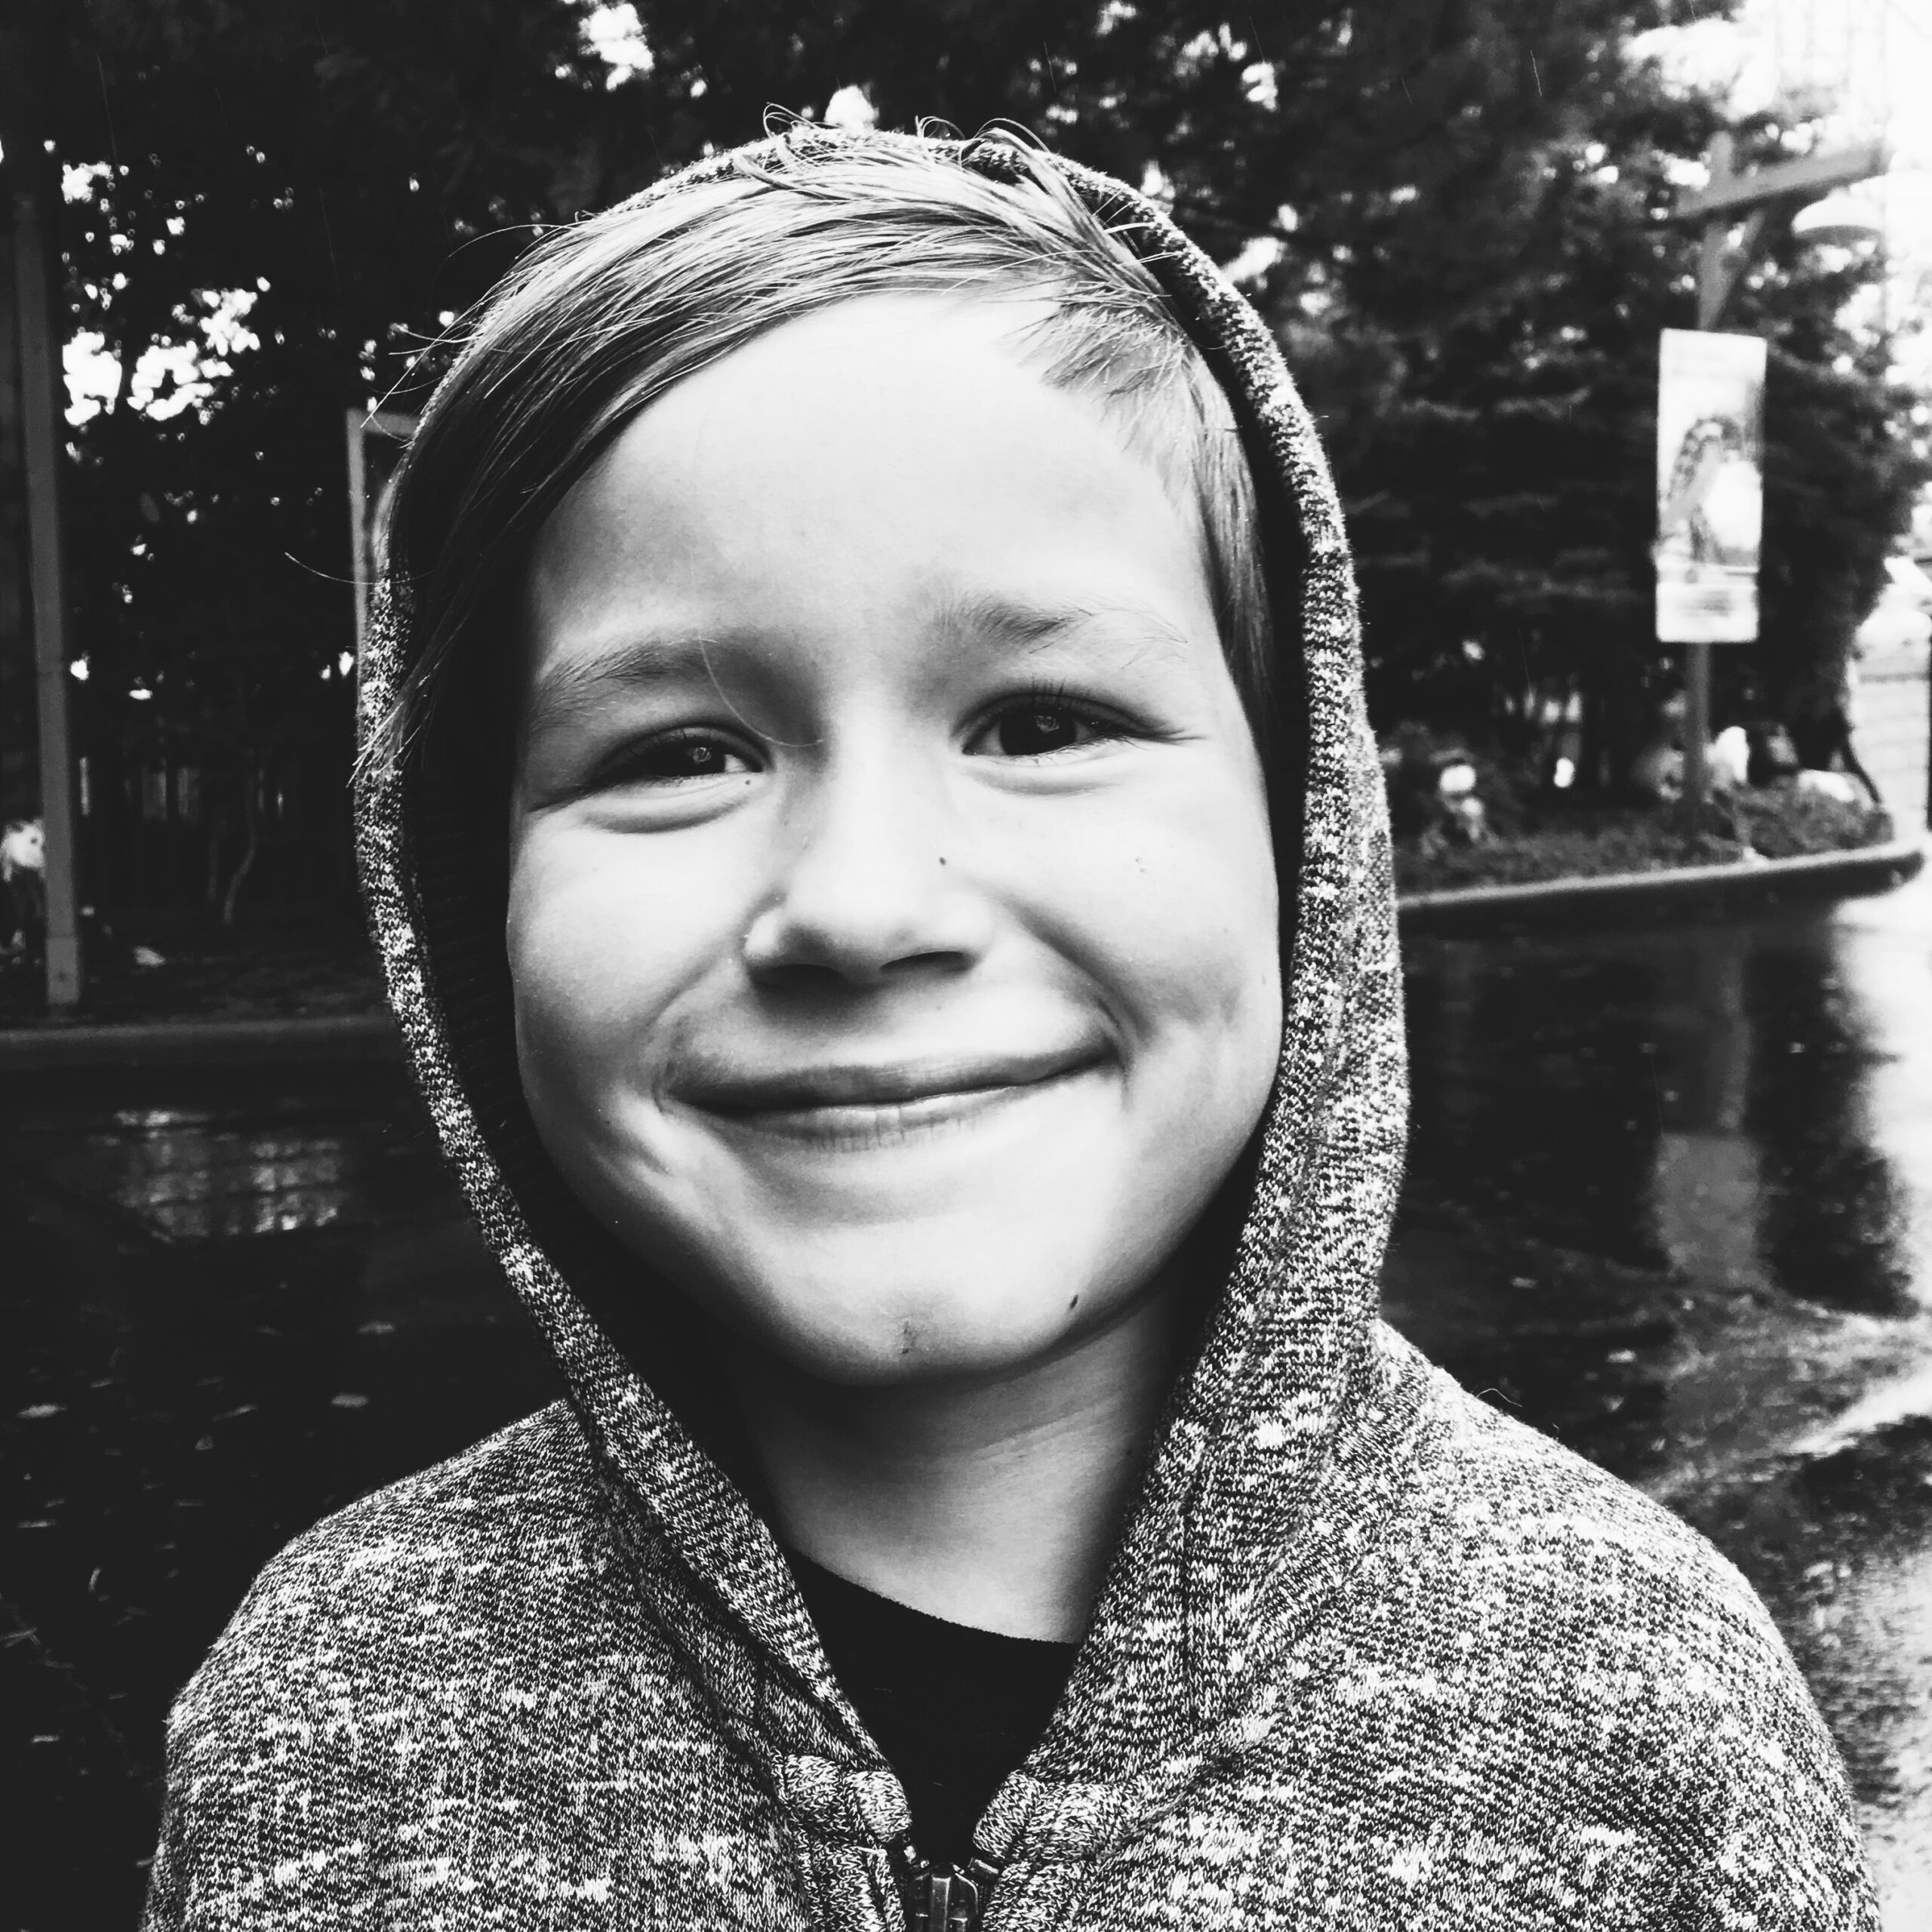 young kid smiling in a hoodie in the rain